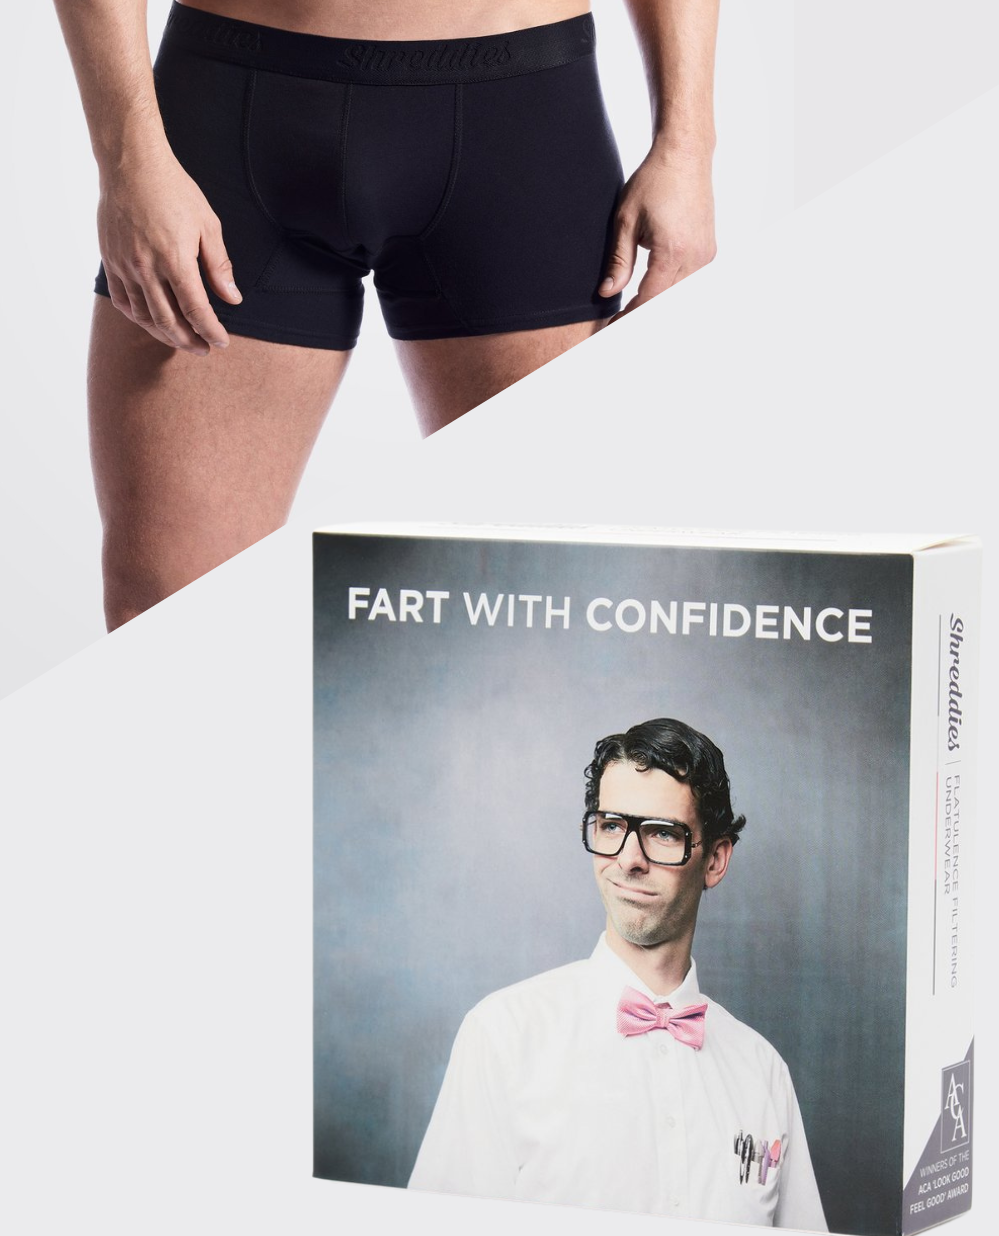 These Women Wore Underwear That Filtered Their Farts And